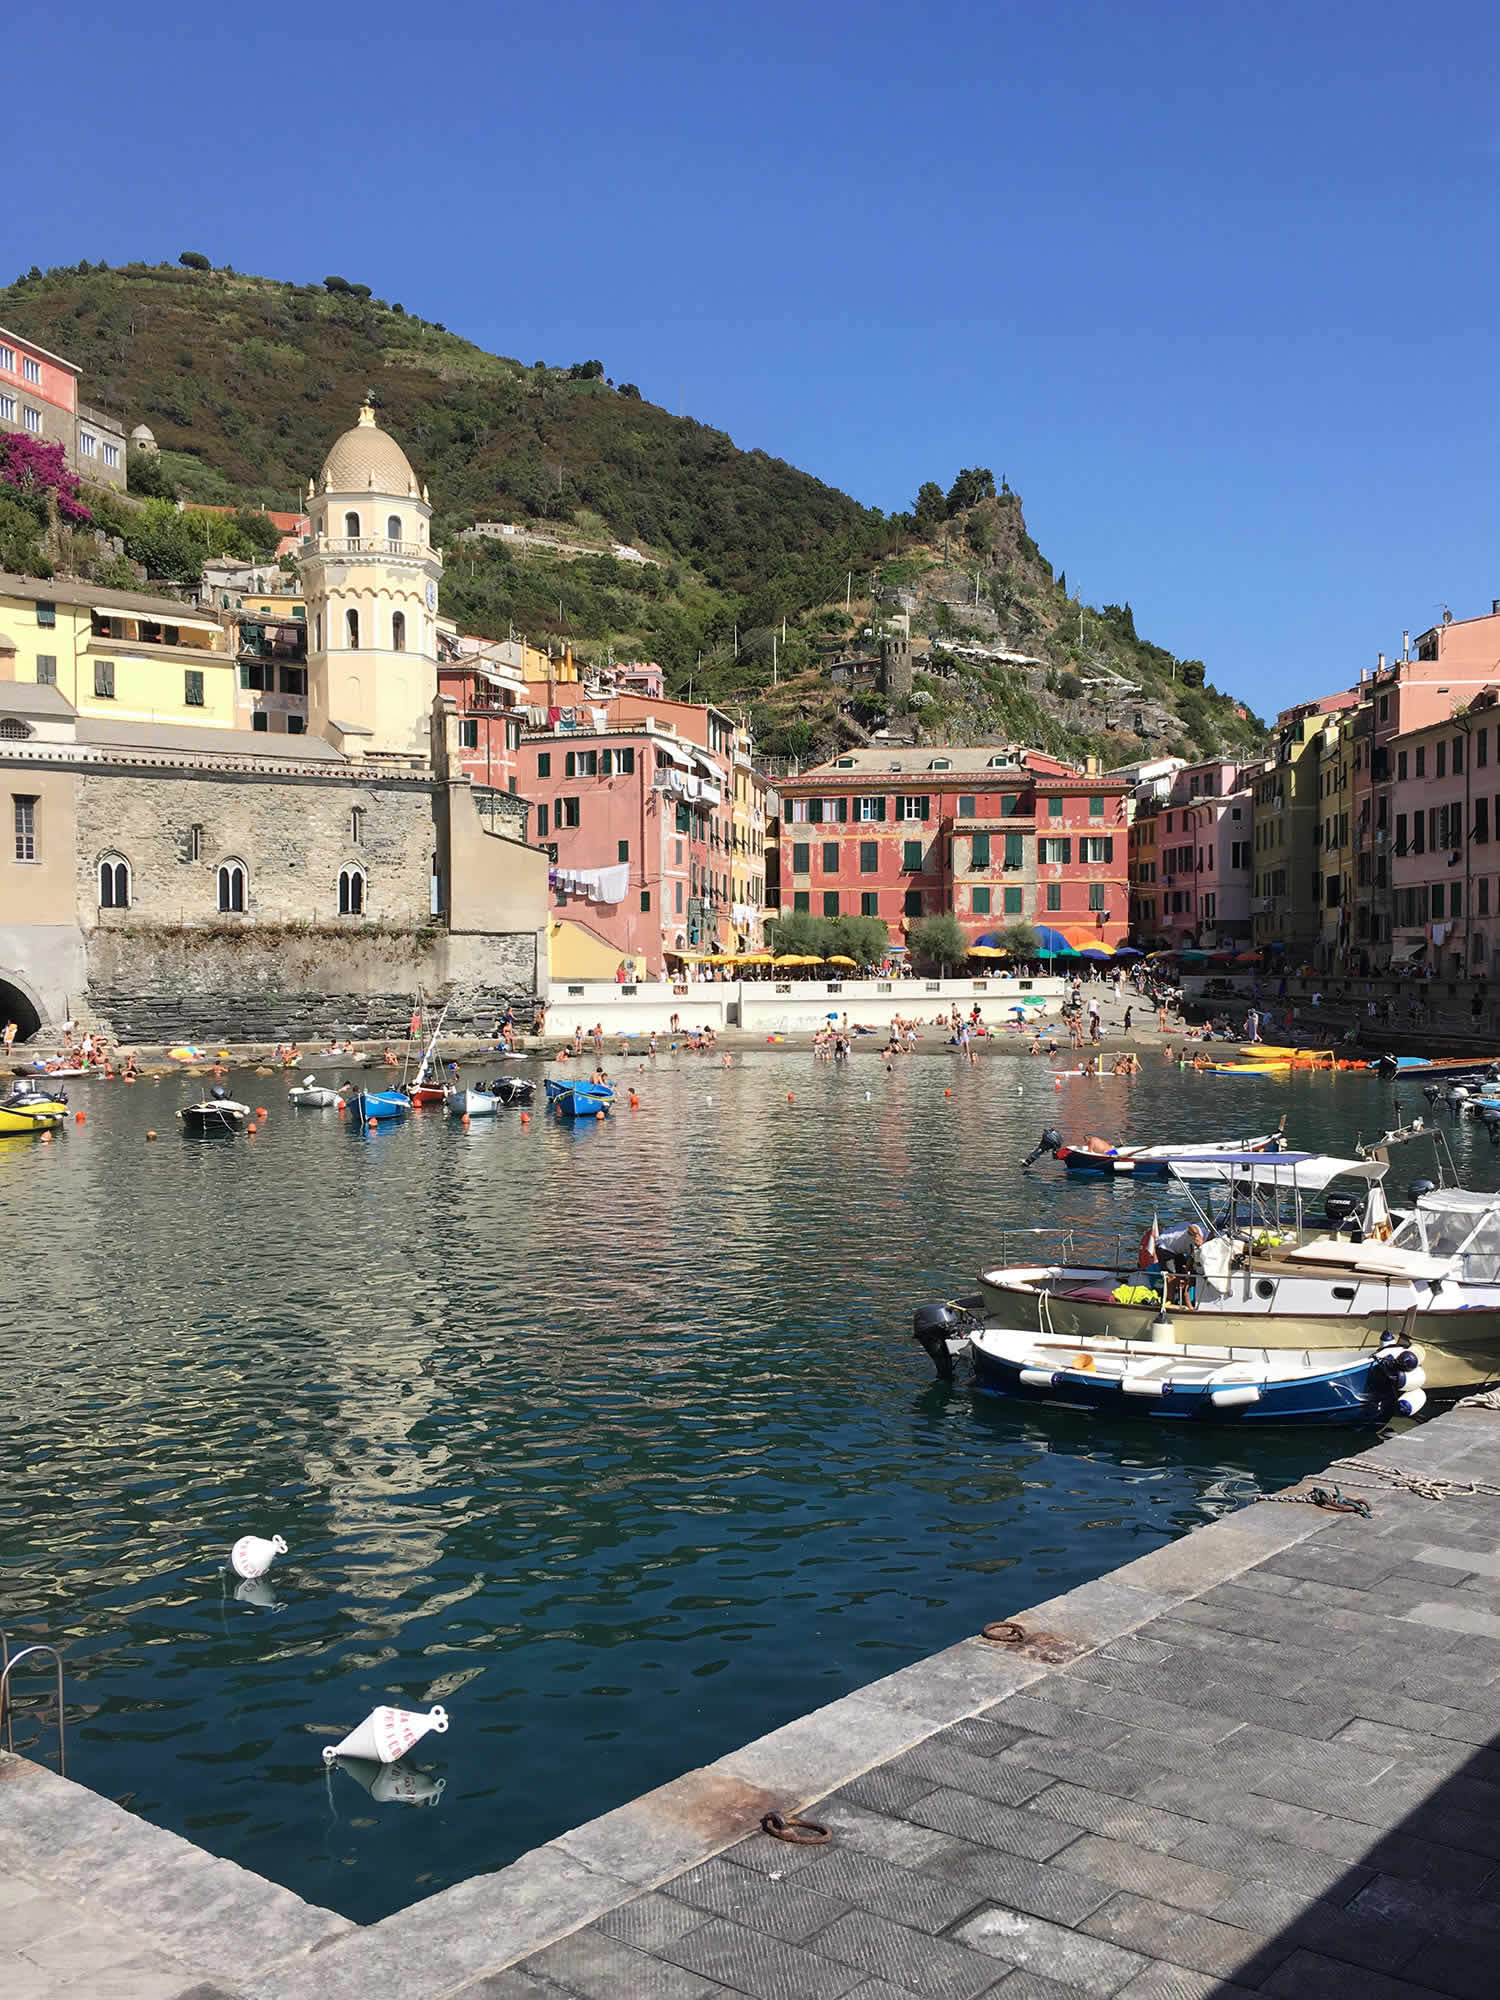 Ladulsatina - A weekend in the Cinque Terre - Vernazza